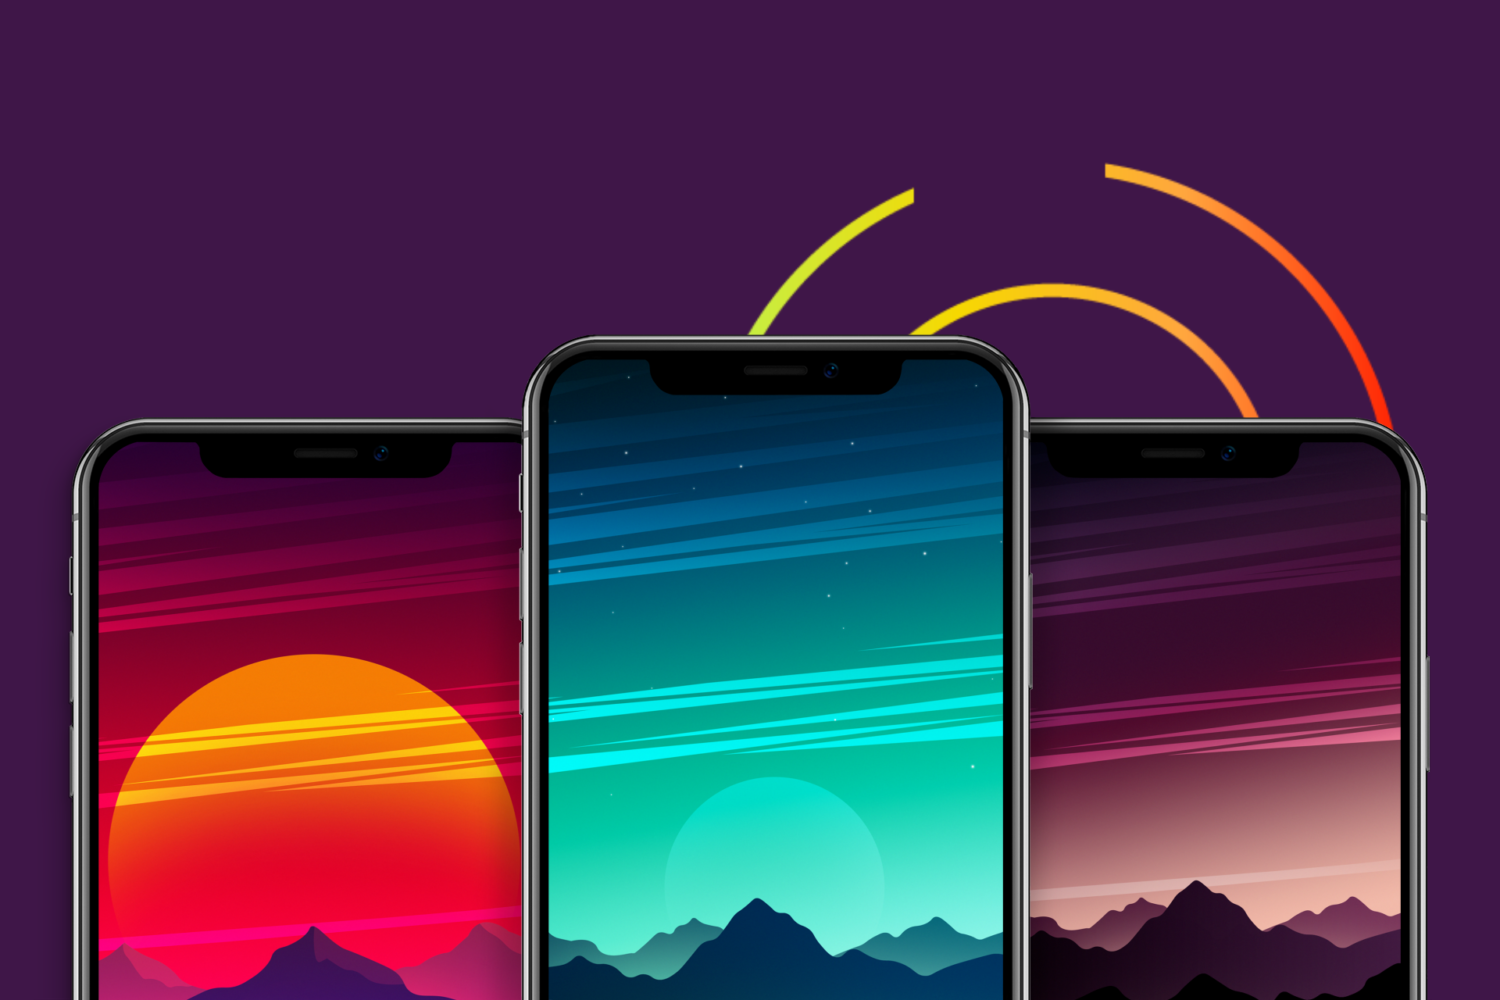 Download wallpapers for mobile & desktop for free